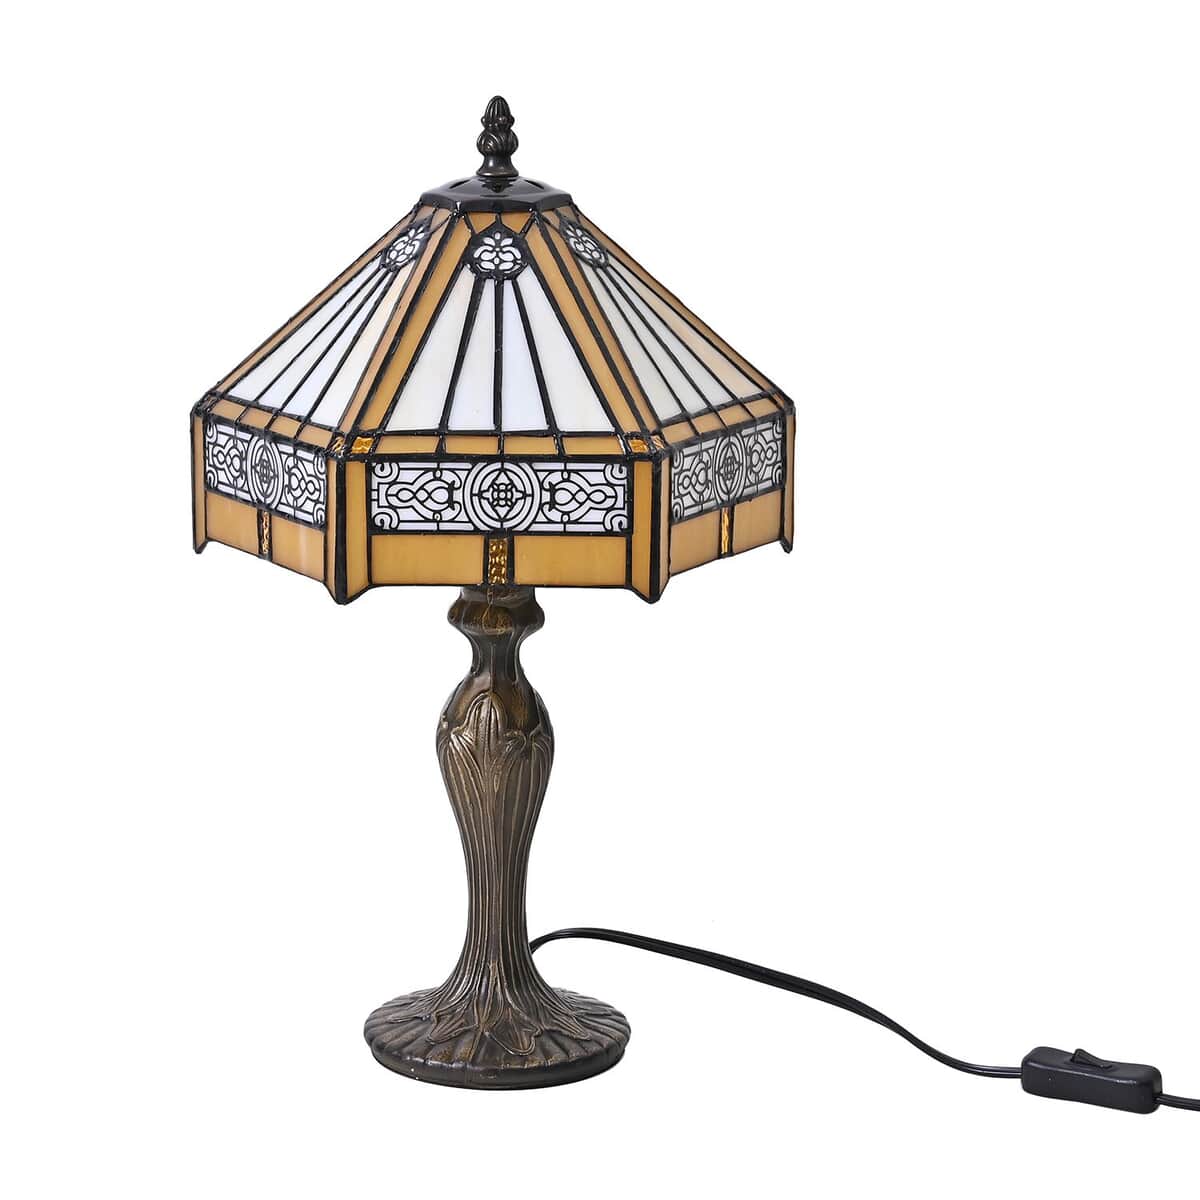 6-Sided Classic Filigree Pattern 10 Inch Tiffany Inspired Table Lamp (E26 Bulb Not Included) image number 0